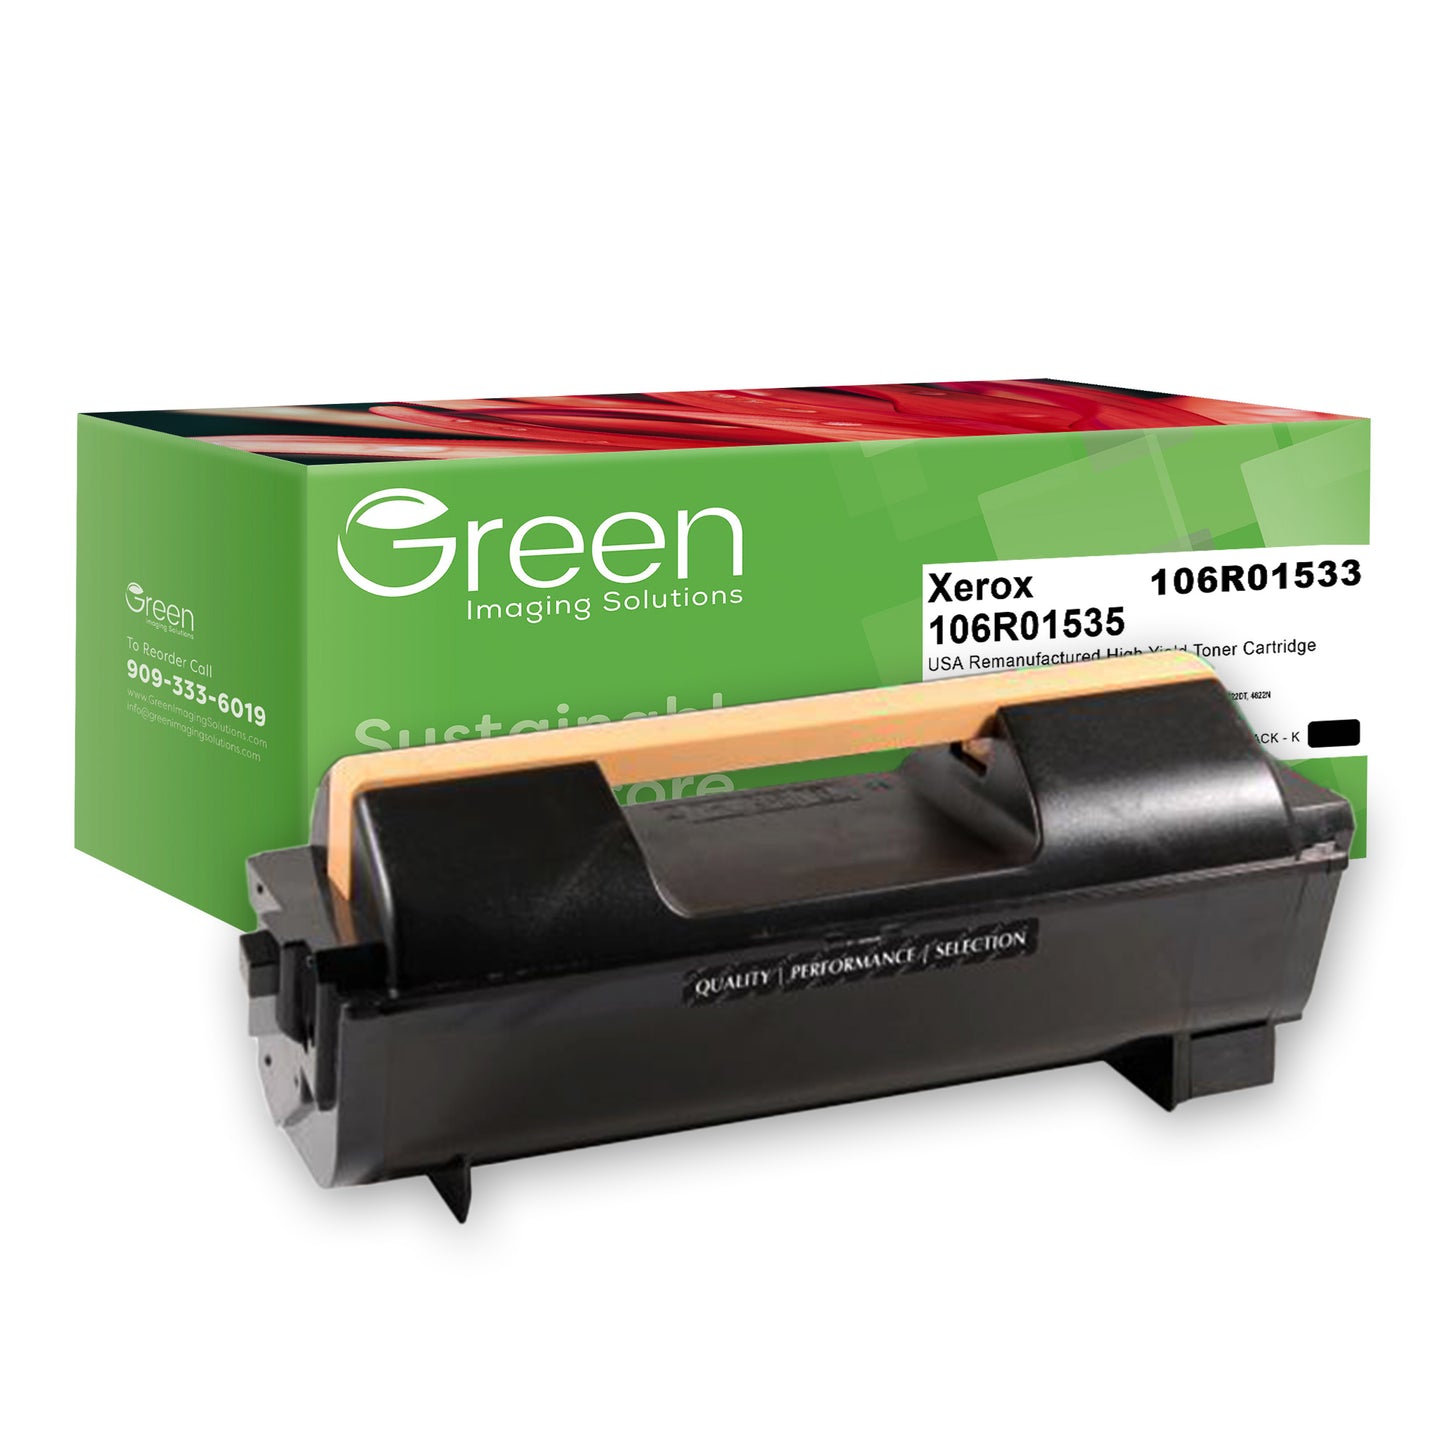 Green Imaging Solutions USA Remanufactured High Yield Toner Cartridge for Xerox 106R01535